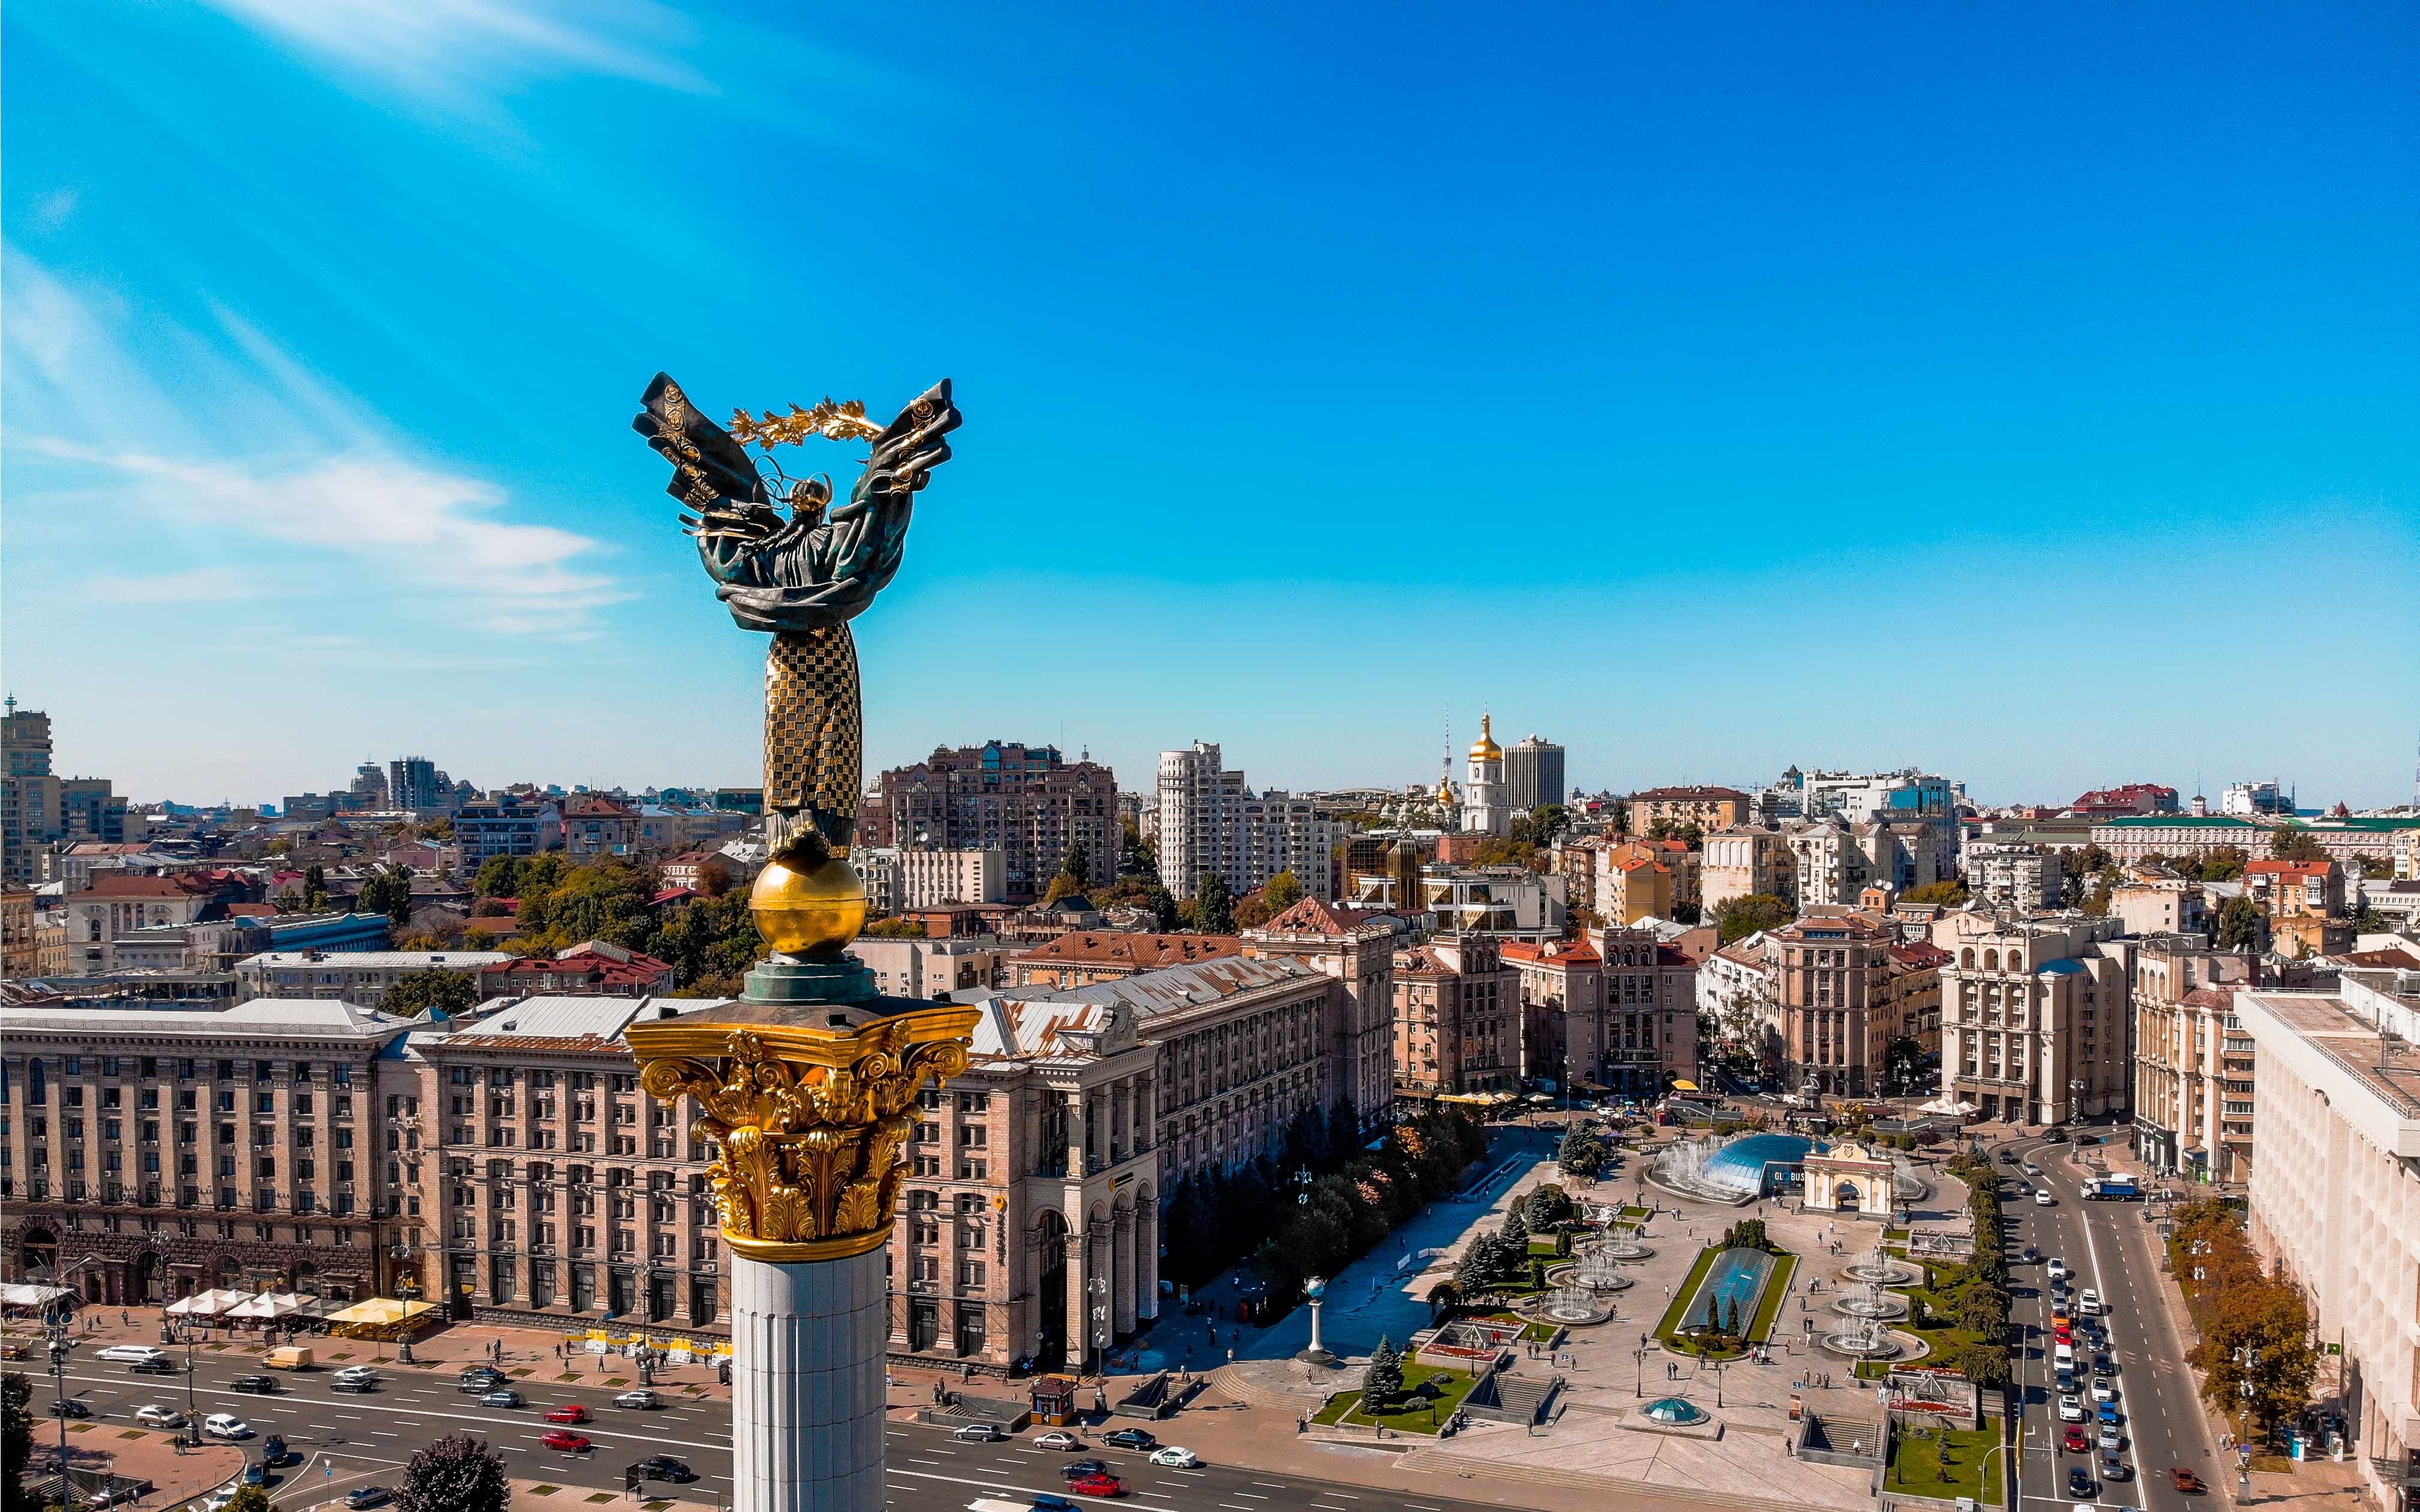 The Independence monument overlooking the city of Kyiv, a column with a figurine of a woman with a rose branch in her arms.